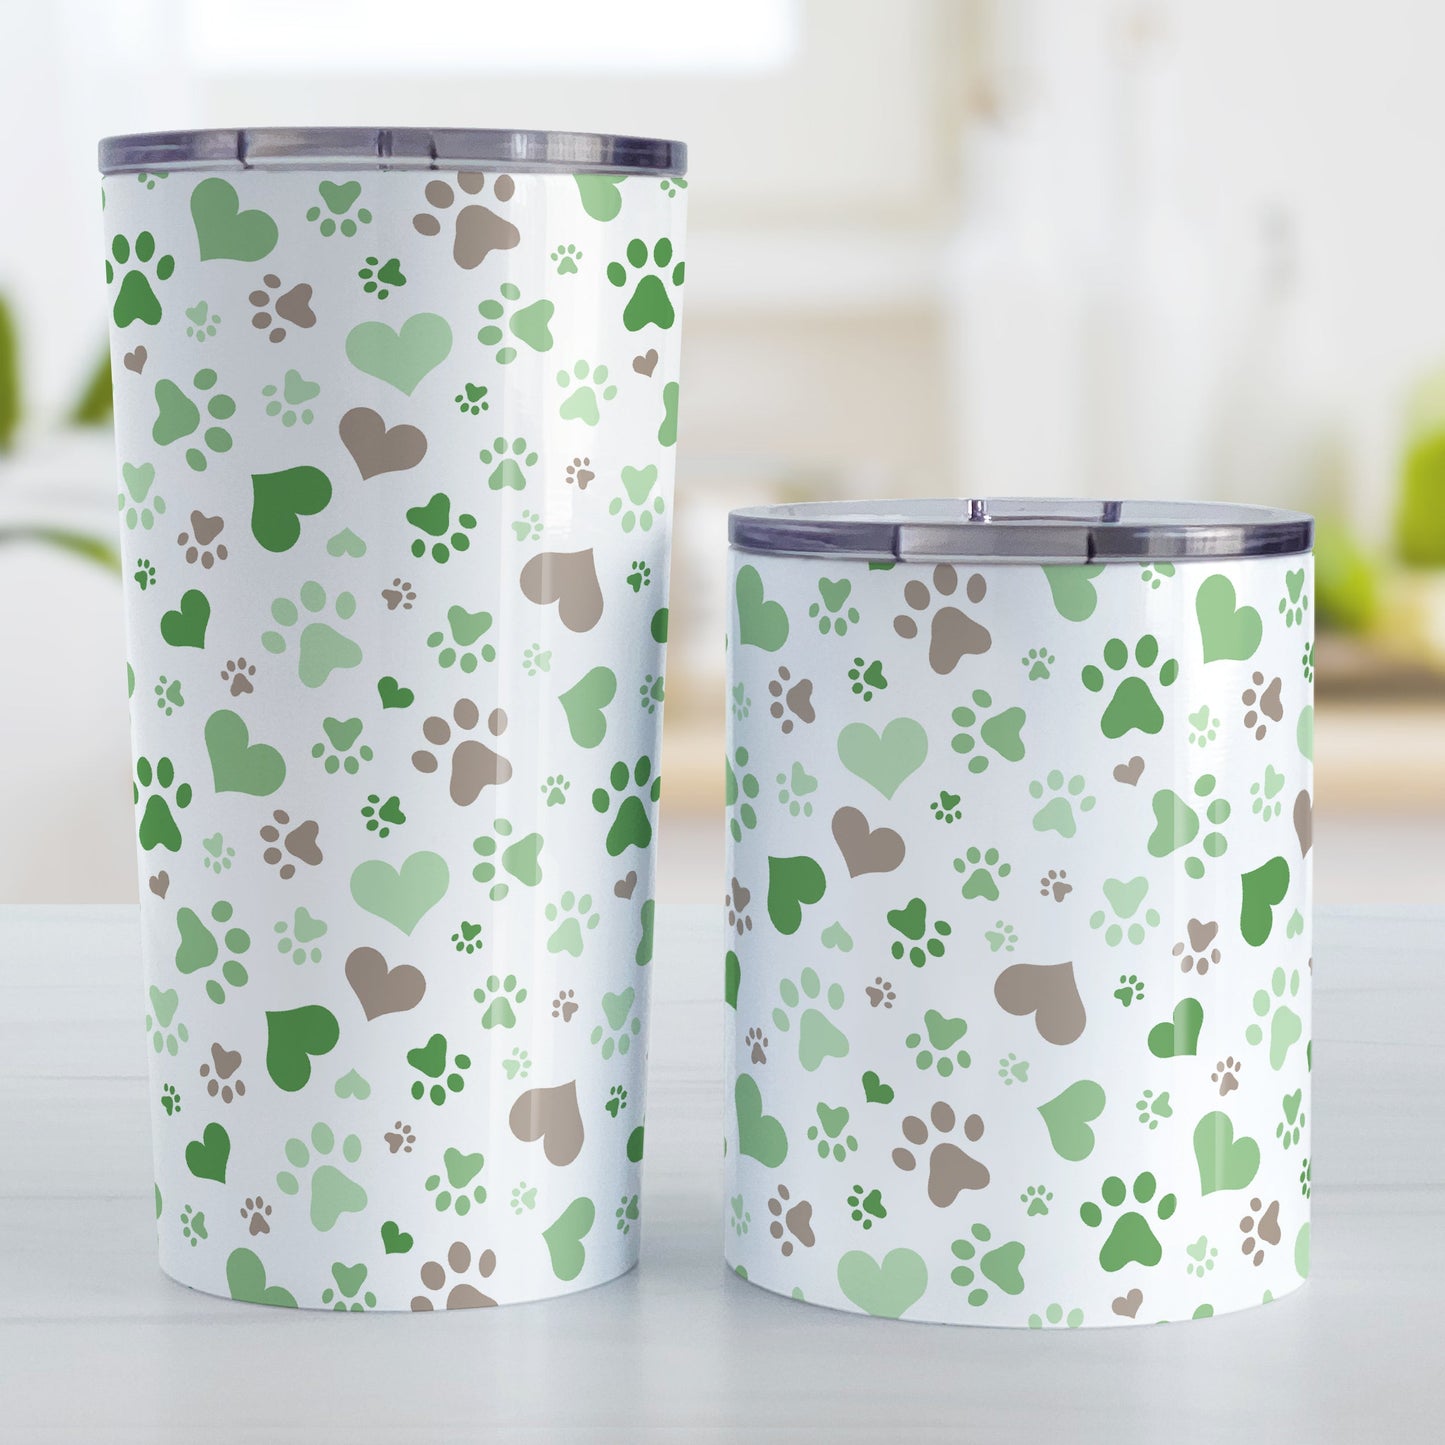 Green Hearts and Paw Prints Tumbler Cup (20oz and 10oz) at Amy's Coffee Mugs. Stainless steel insulated tumbler cups designed with a pattern of hearts and paw prints in brown and different shades of green that wraps around the cups. These tumbler cups are perfect for people love dogs and cute paw print designs. The photo shows both sized cups next to each other. 